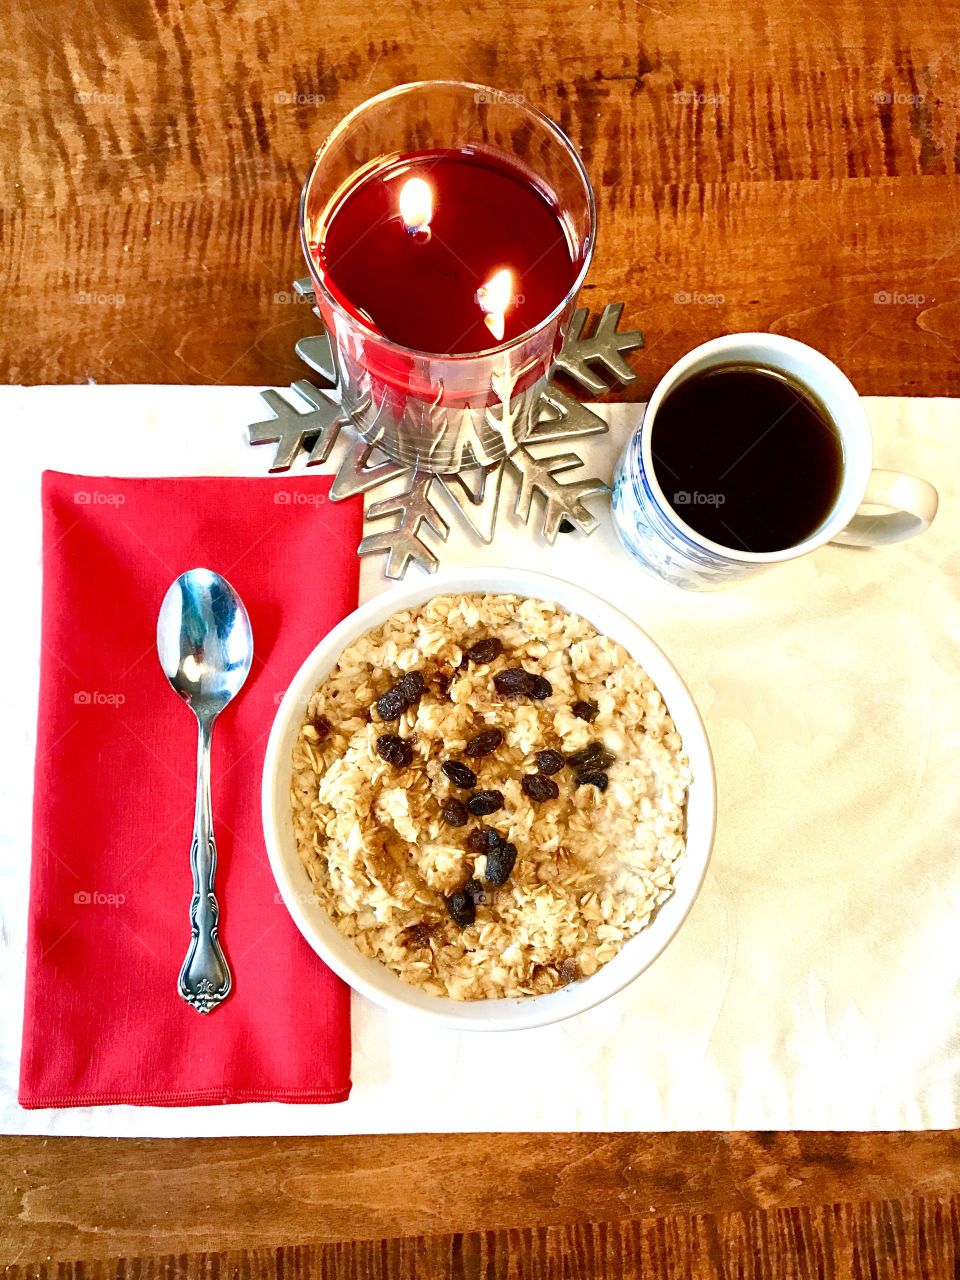 Elegant breakfast of oatmeal and raisins for a cold morning